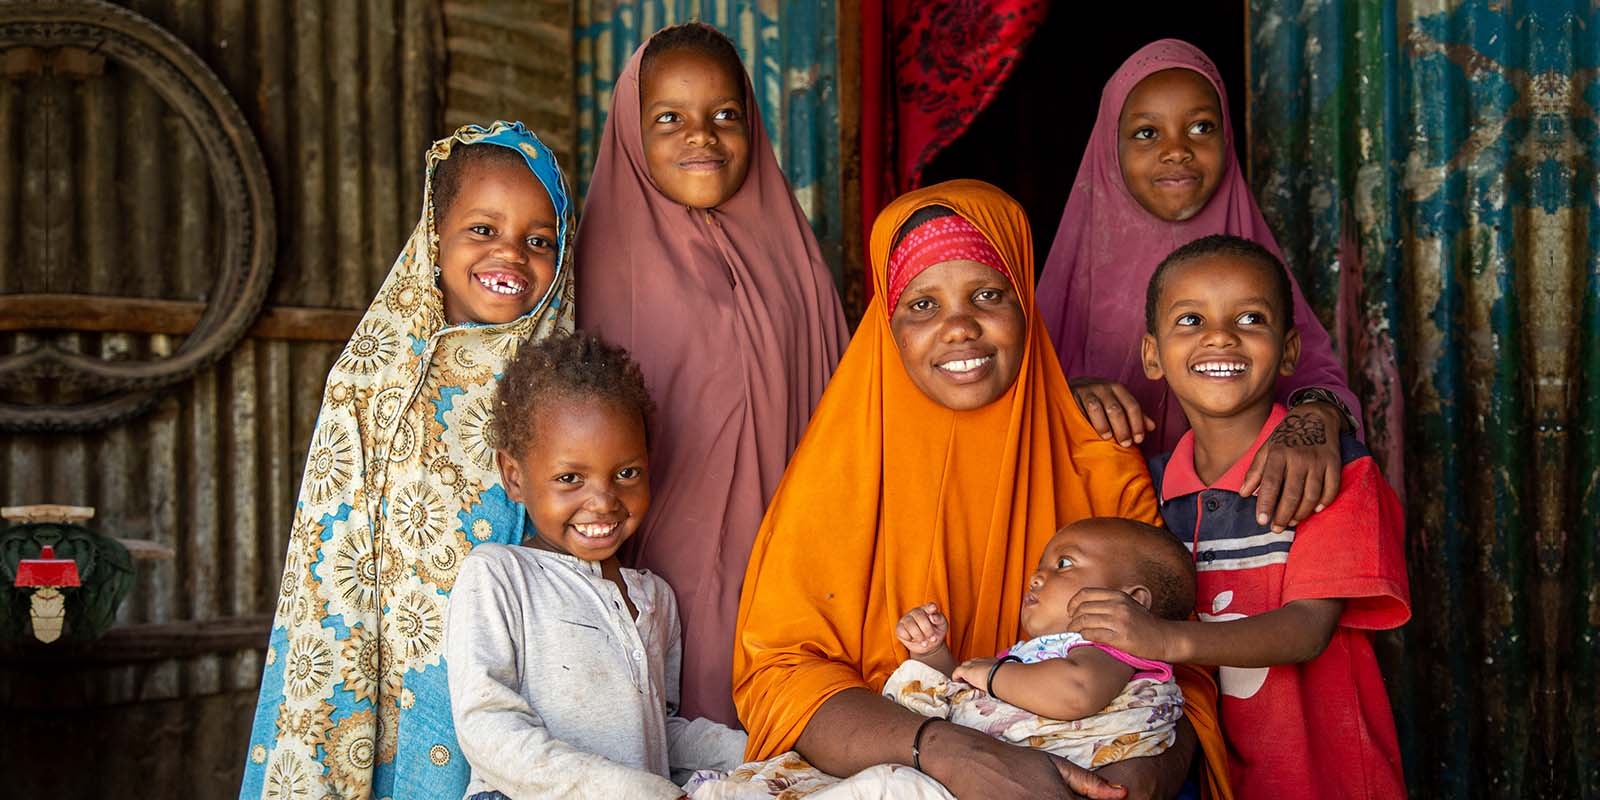 In Somalia, a family poses together while a mother holds a baby in her lap who has been treated for severe acute malnutrition. 